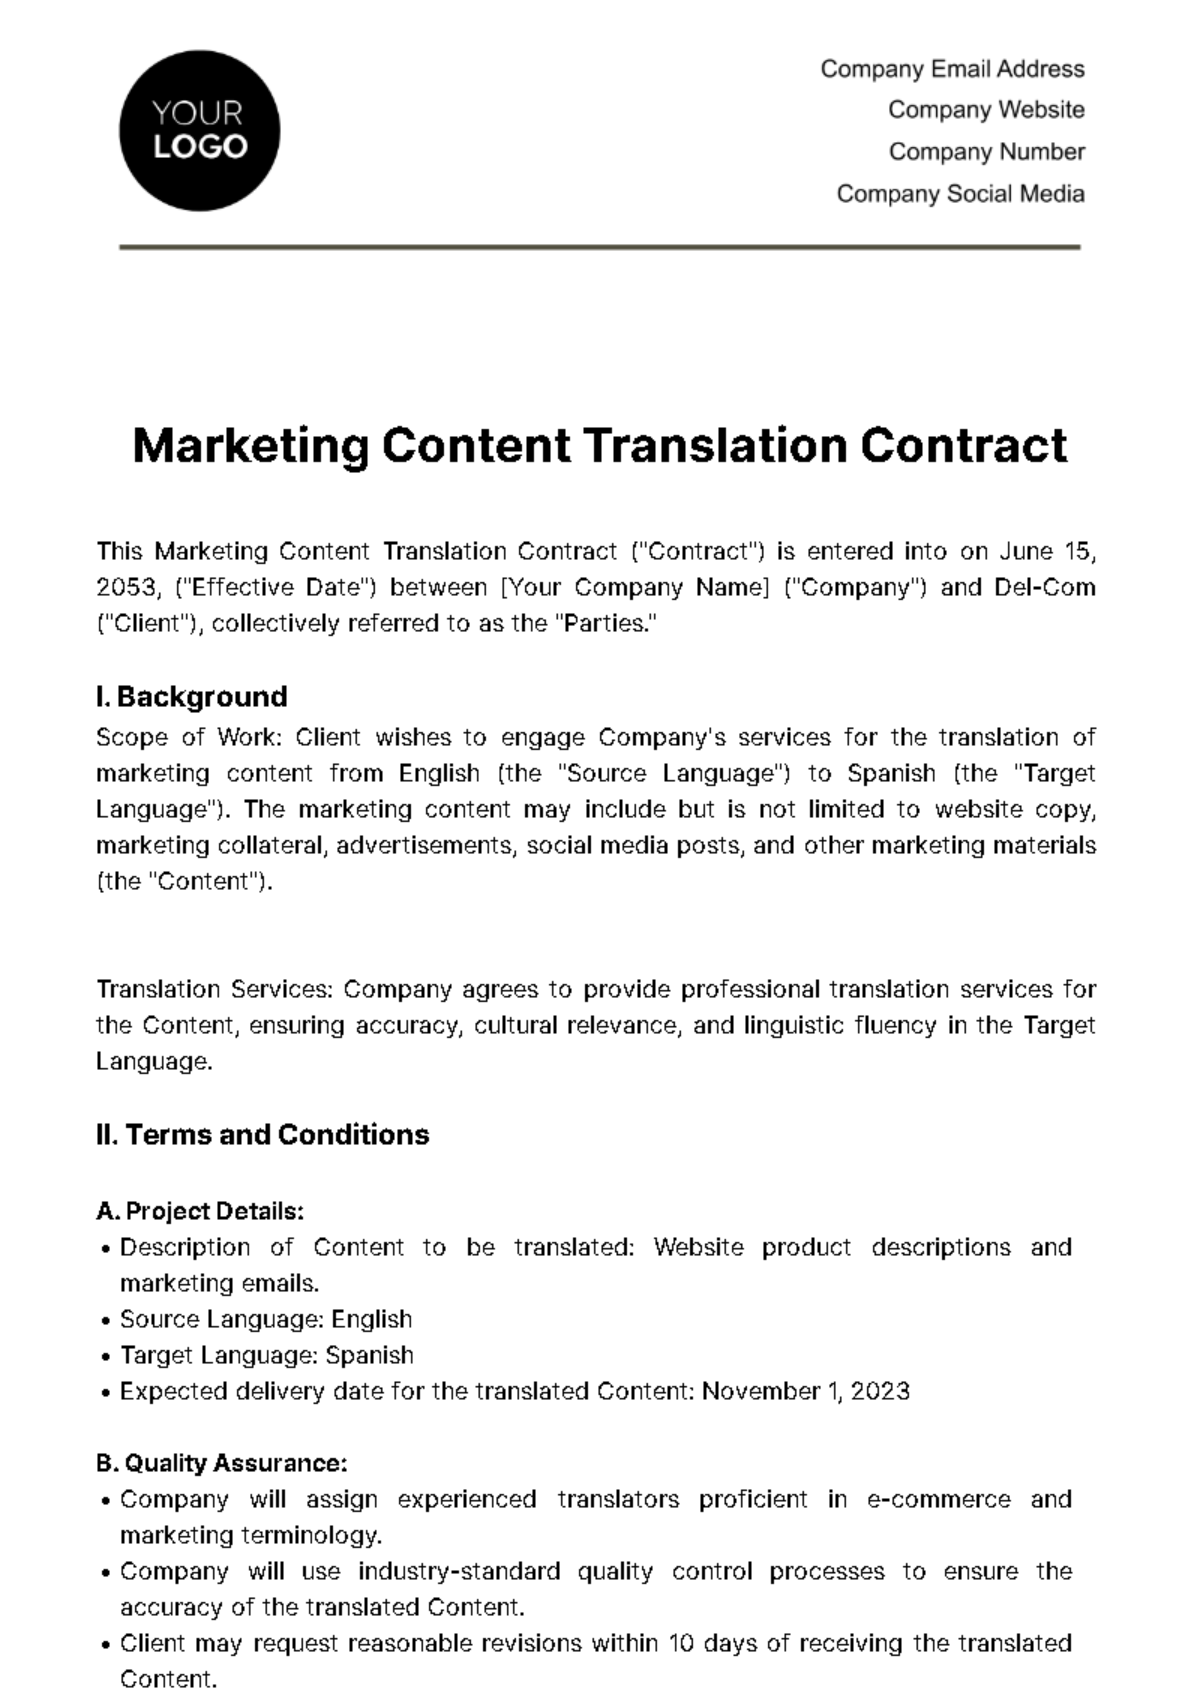 Free Marketing Content Translation Contract Template